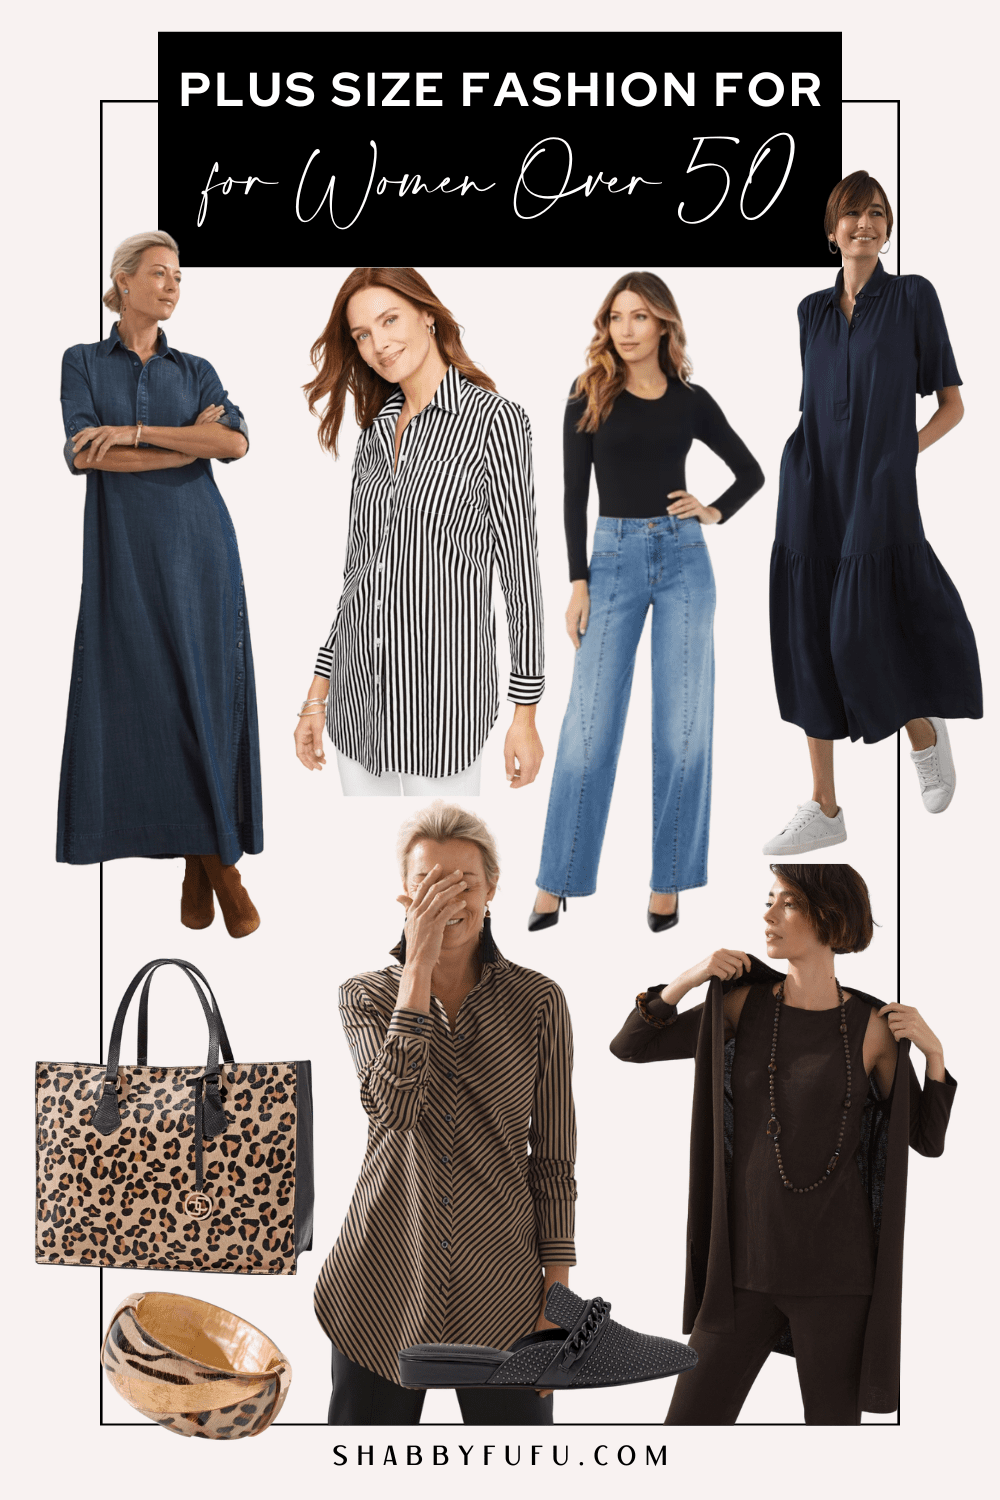 Fashion Blogs For Petites Over 50